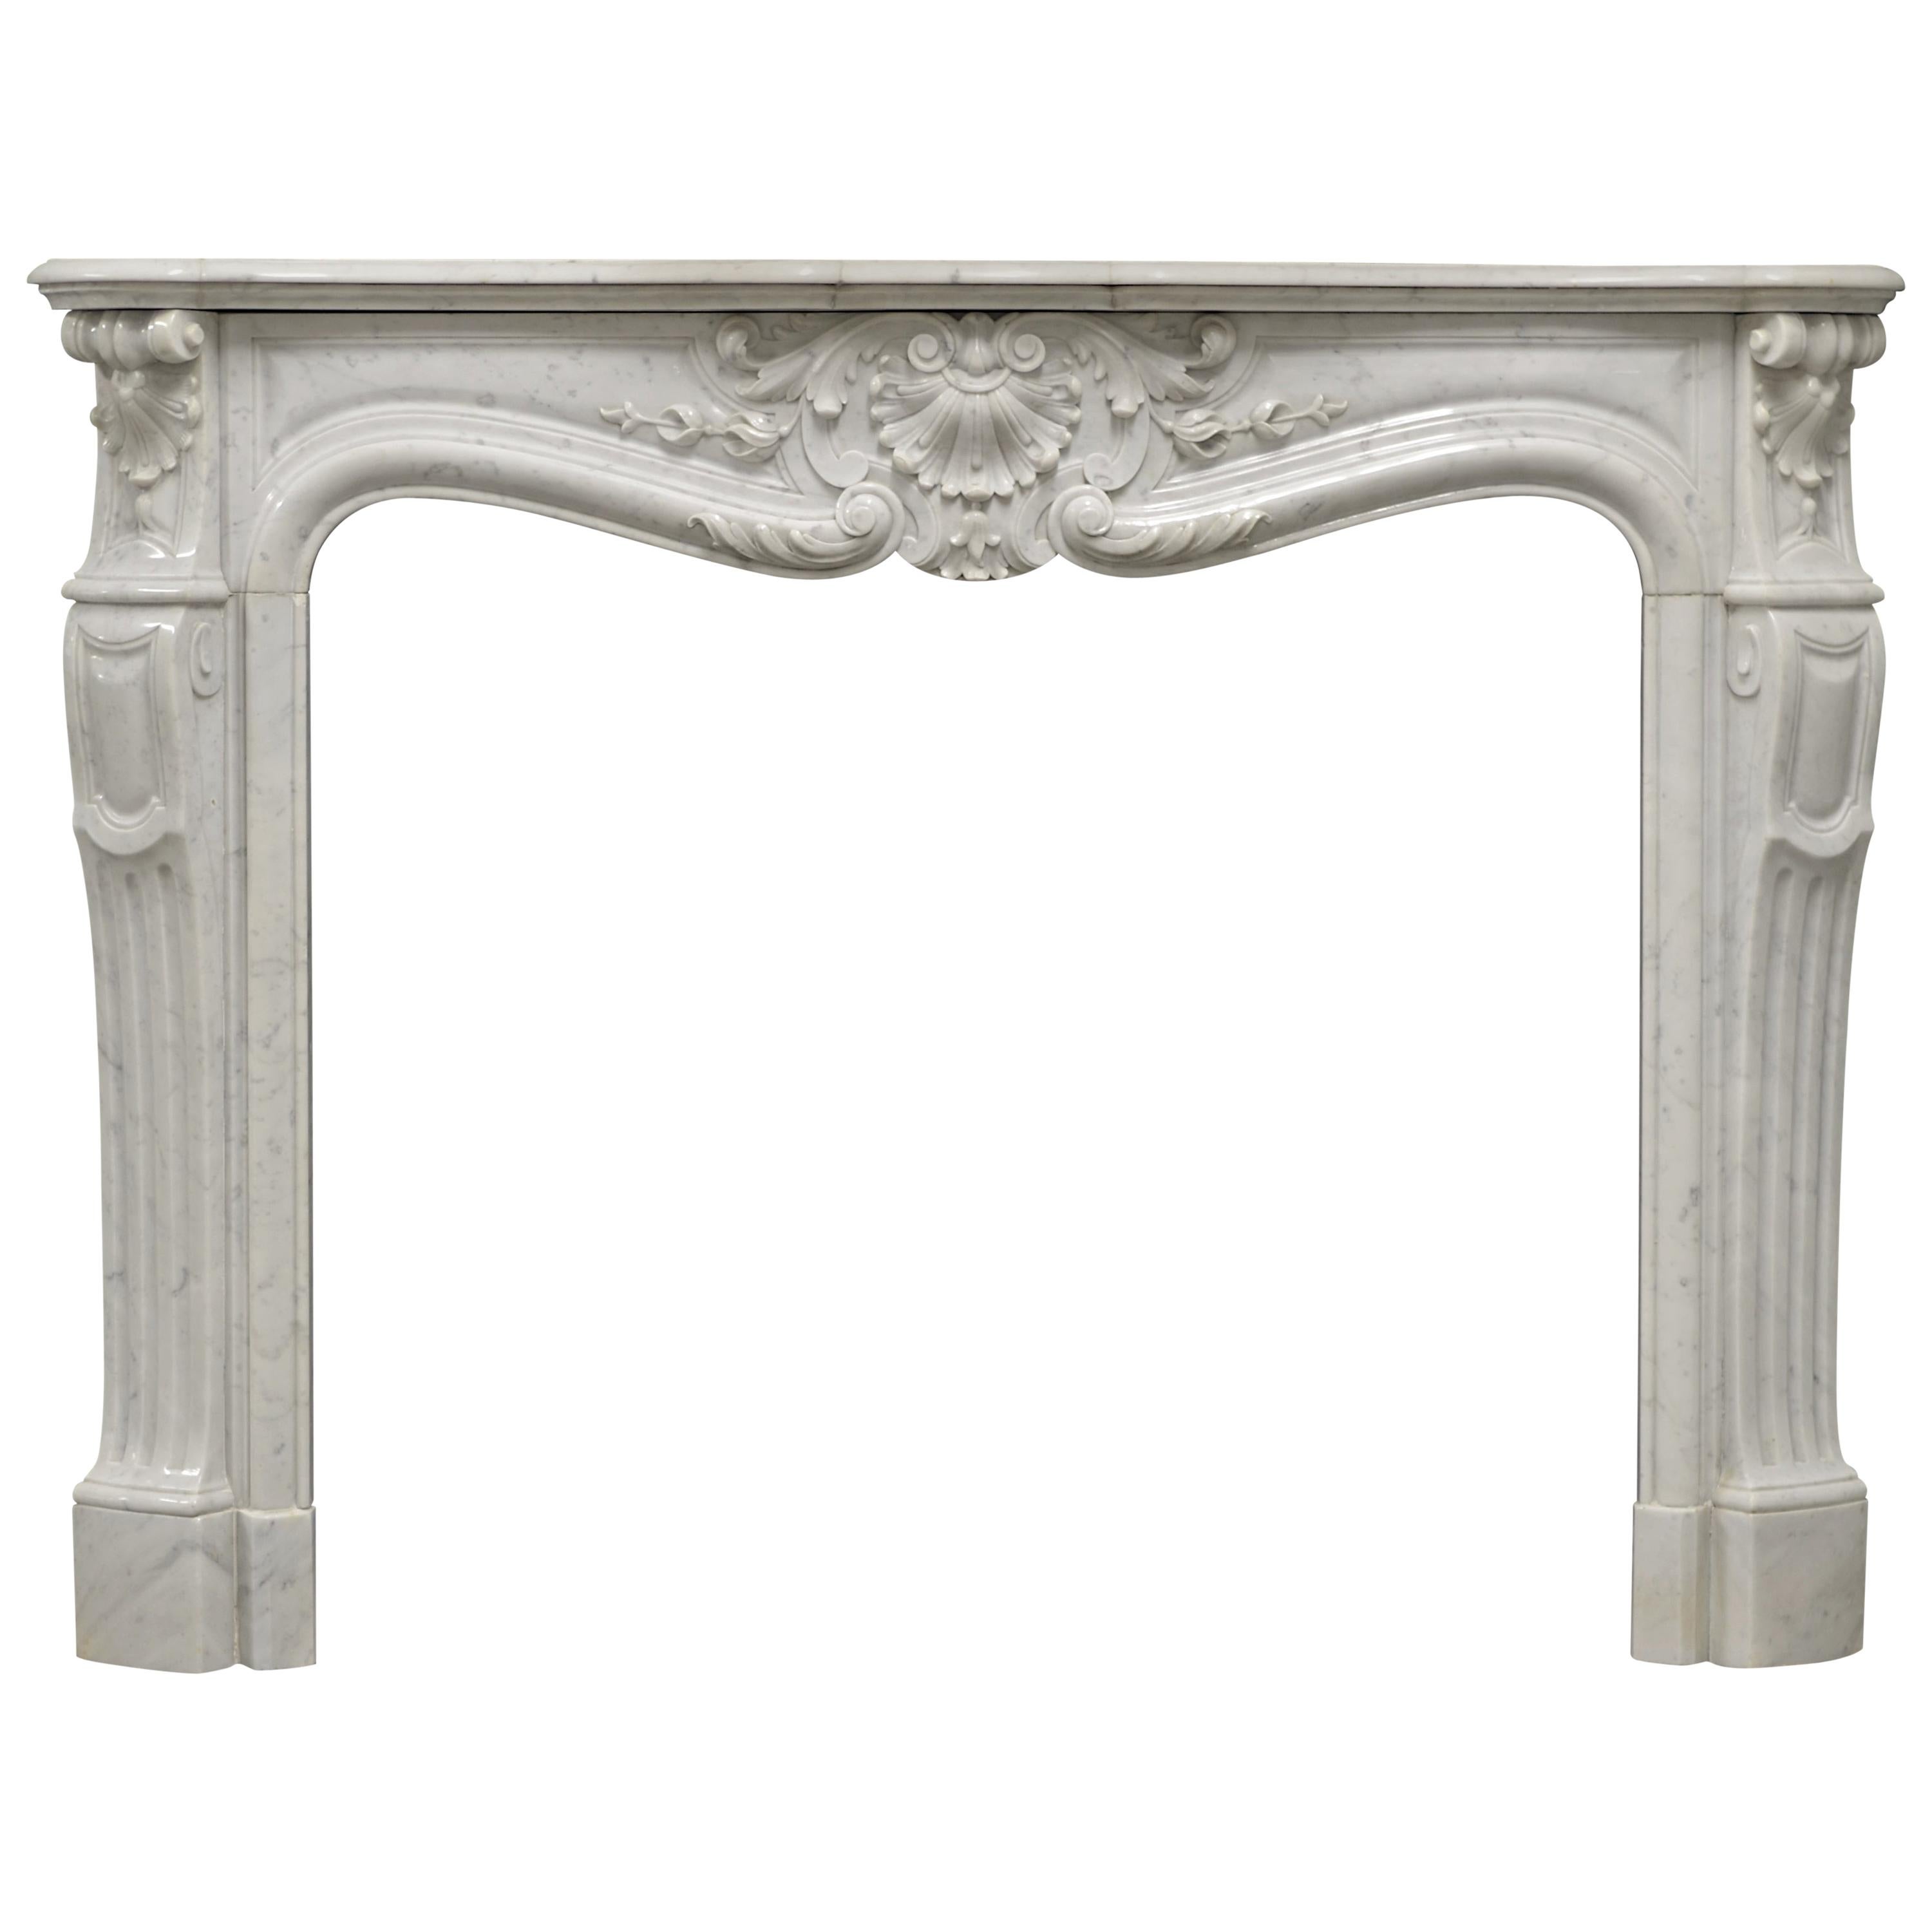 Antique Fireplace Mantel in White Marble